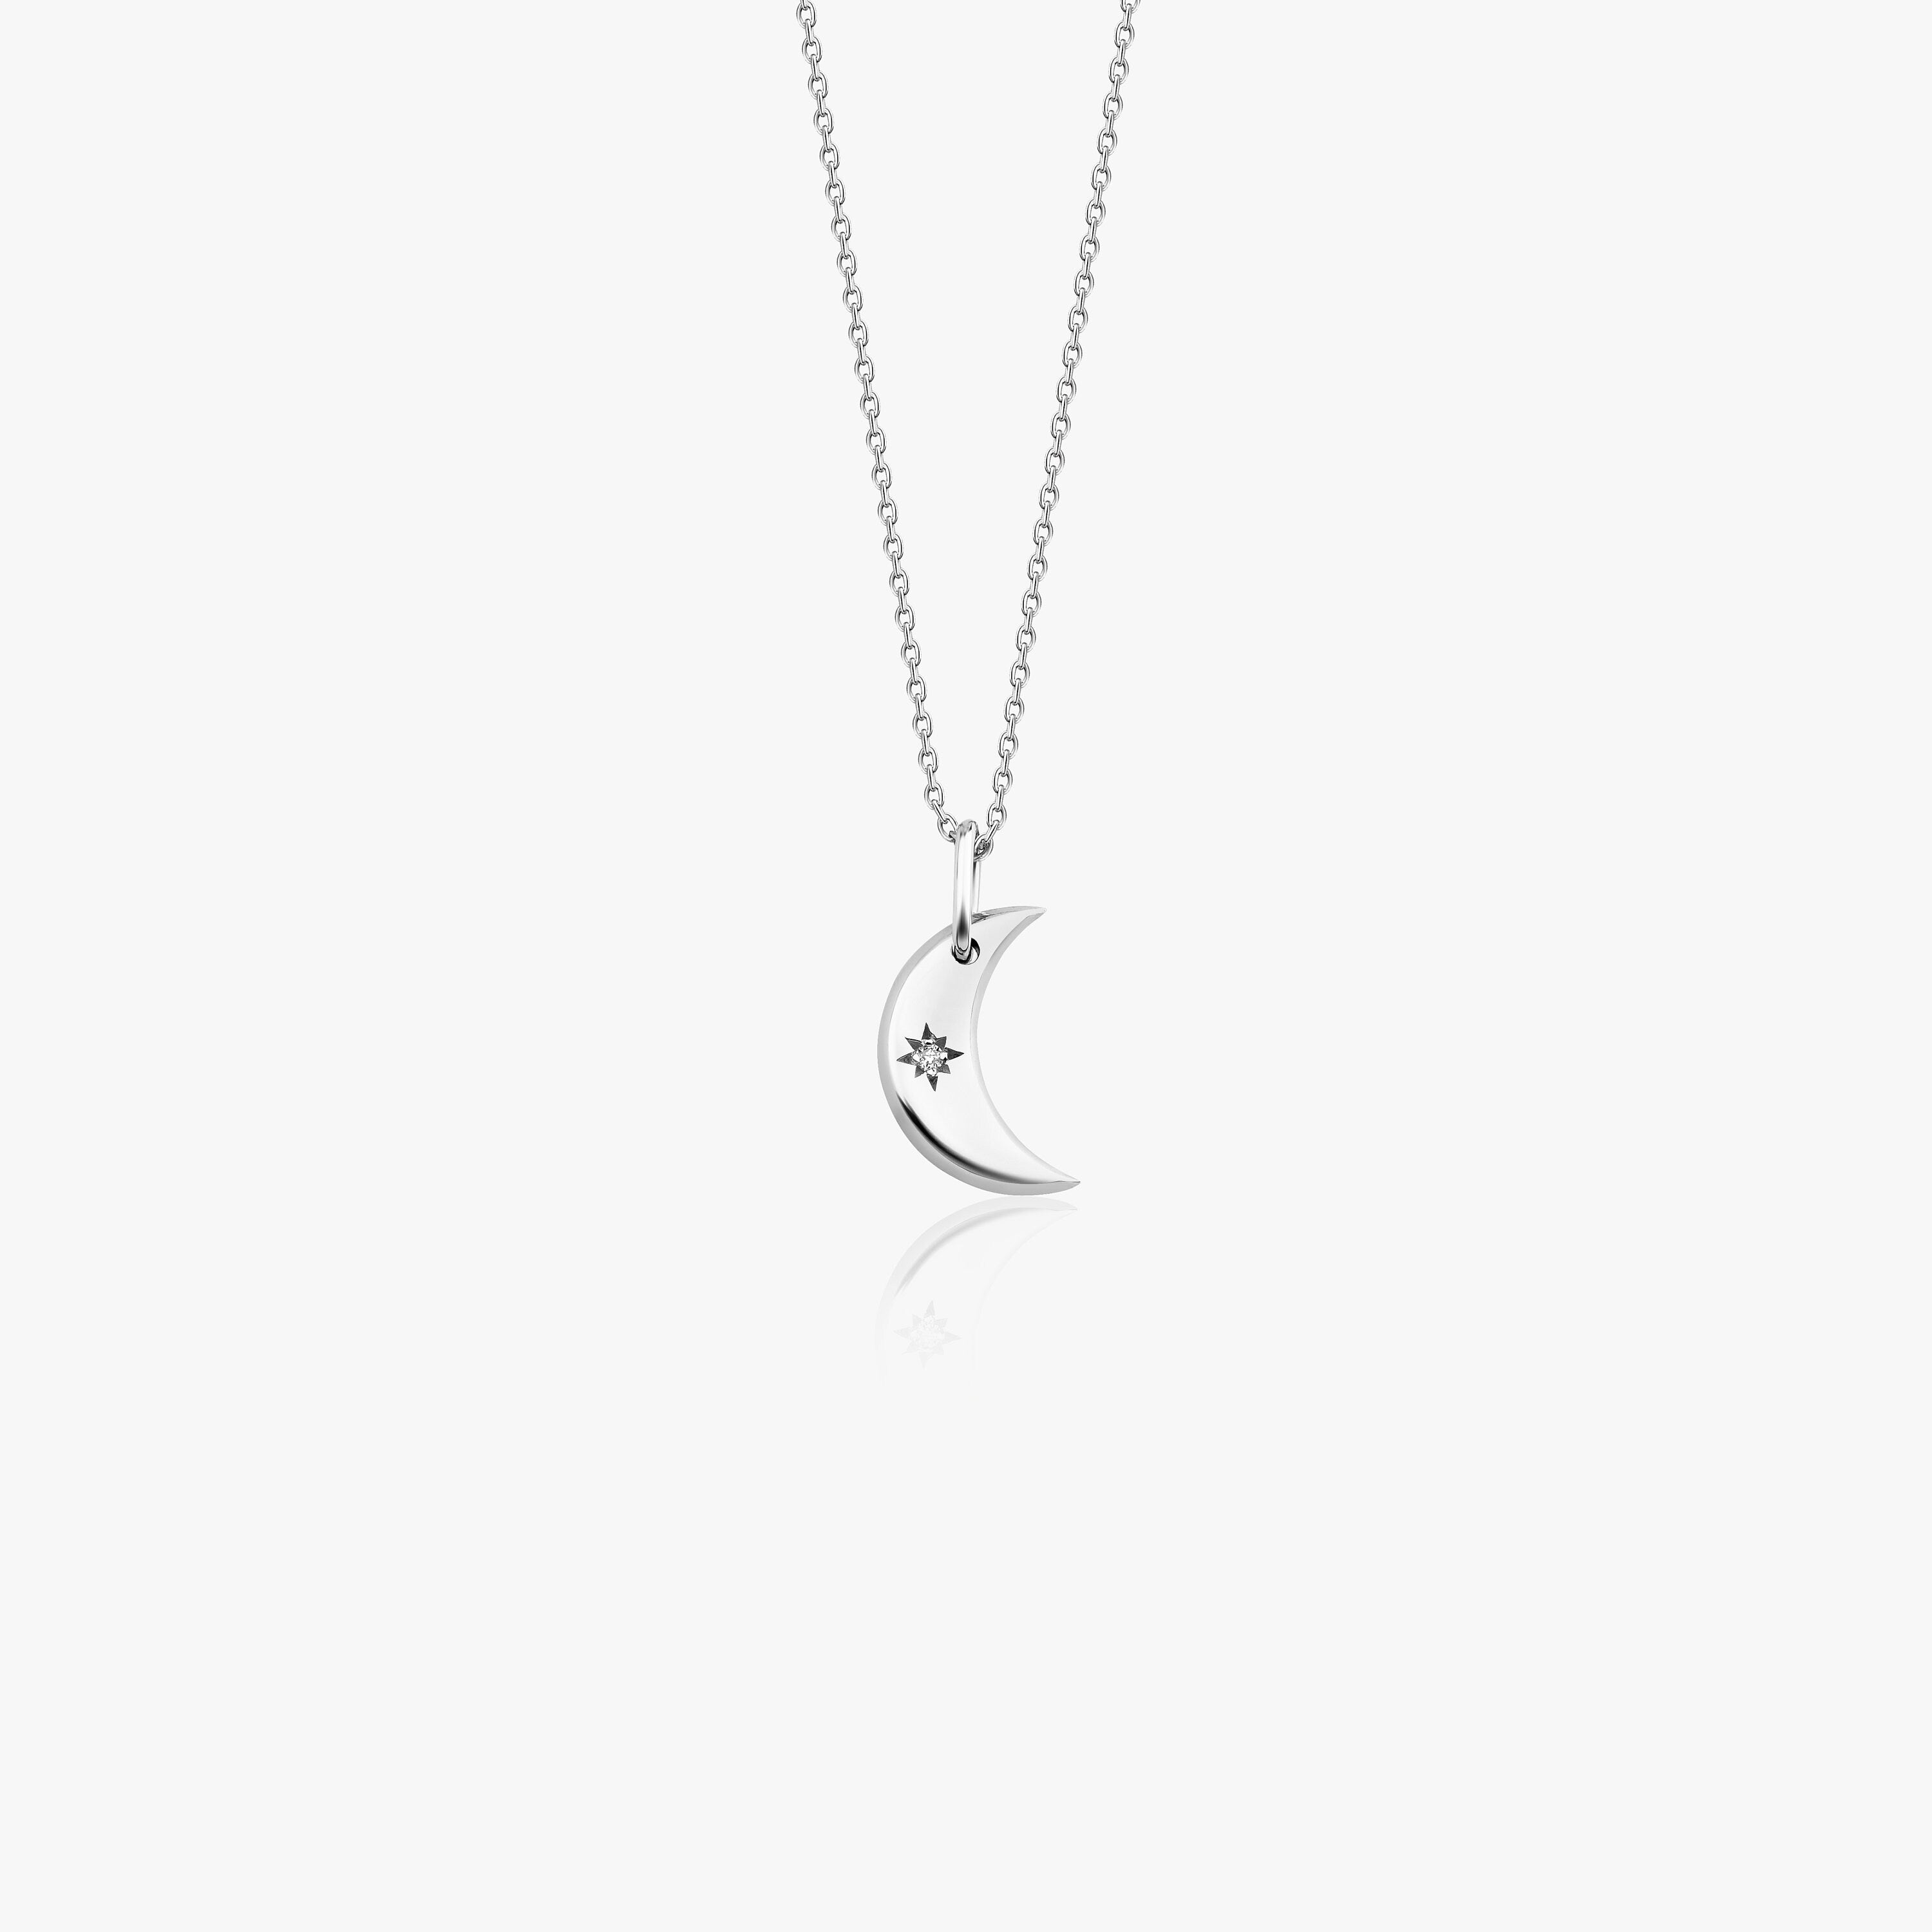 14K Gold Crescent Moon Necklace